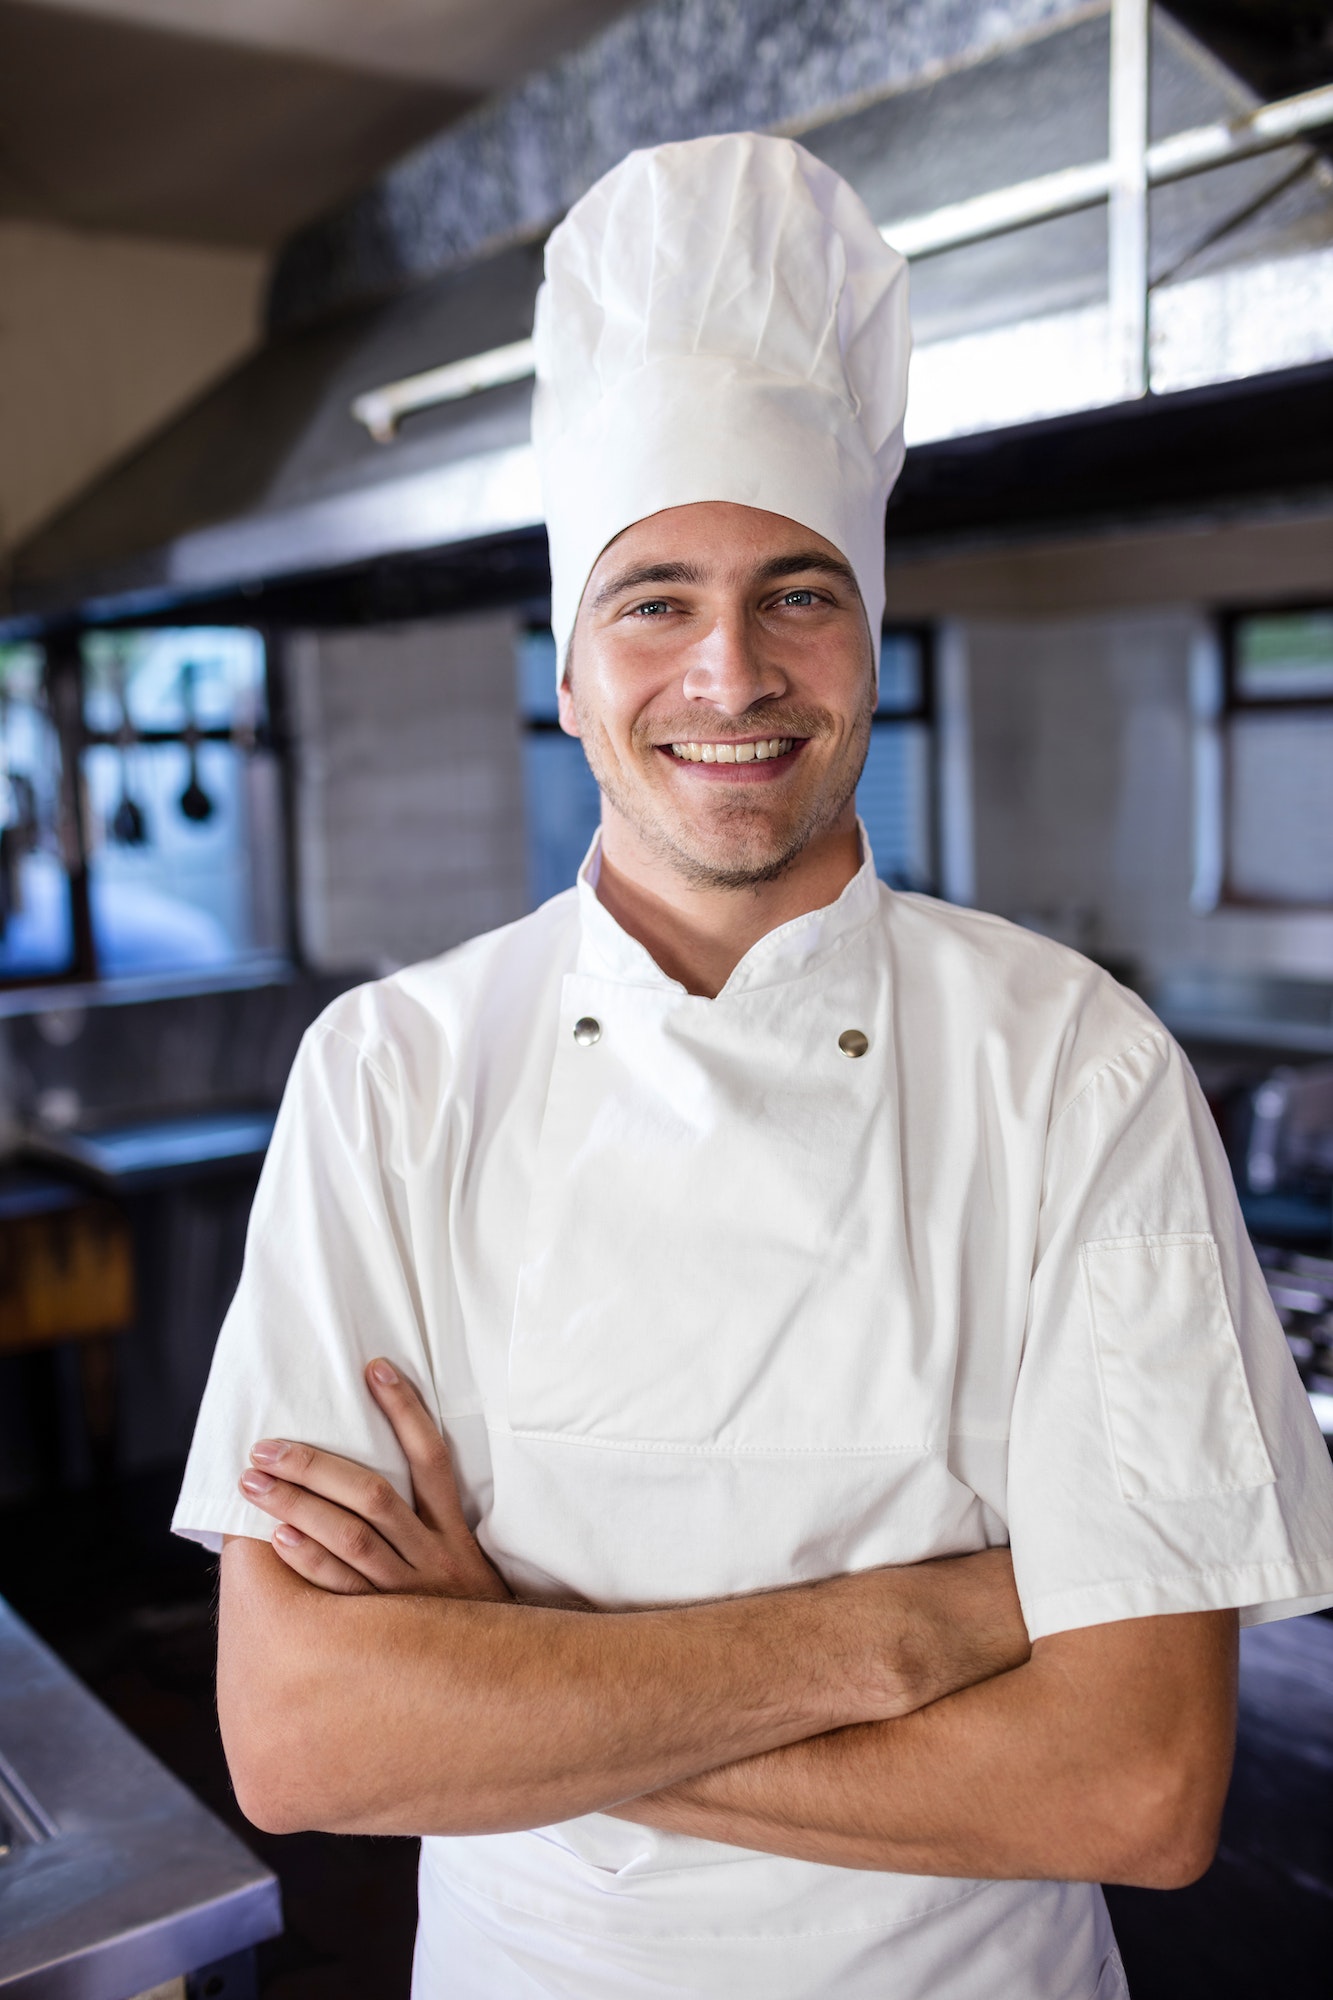 Male chef standing with arms crossed in kitchen